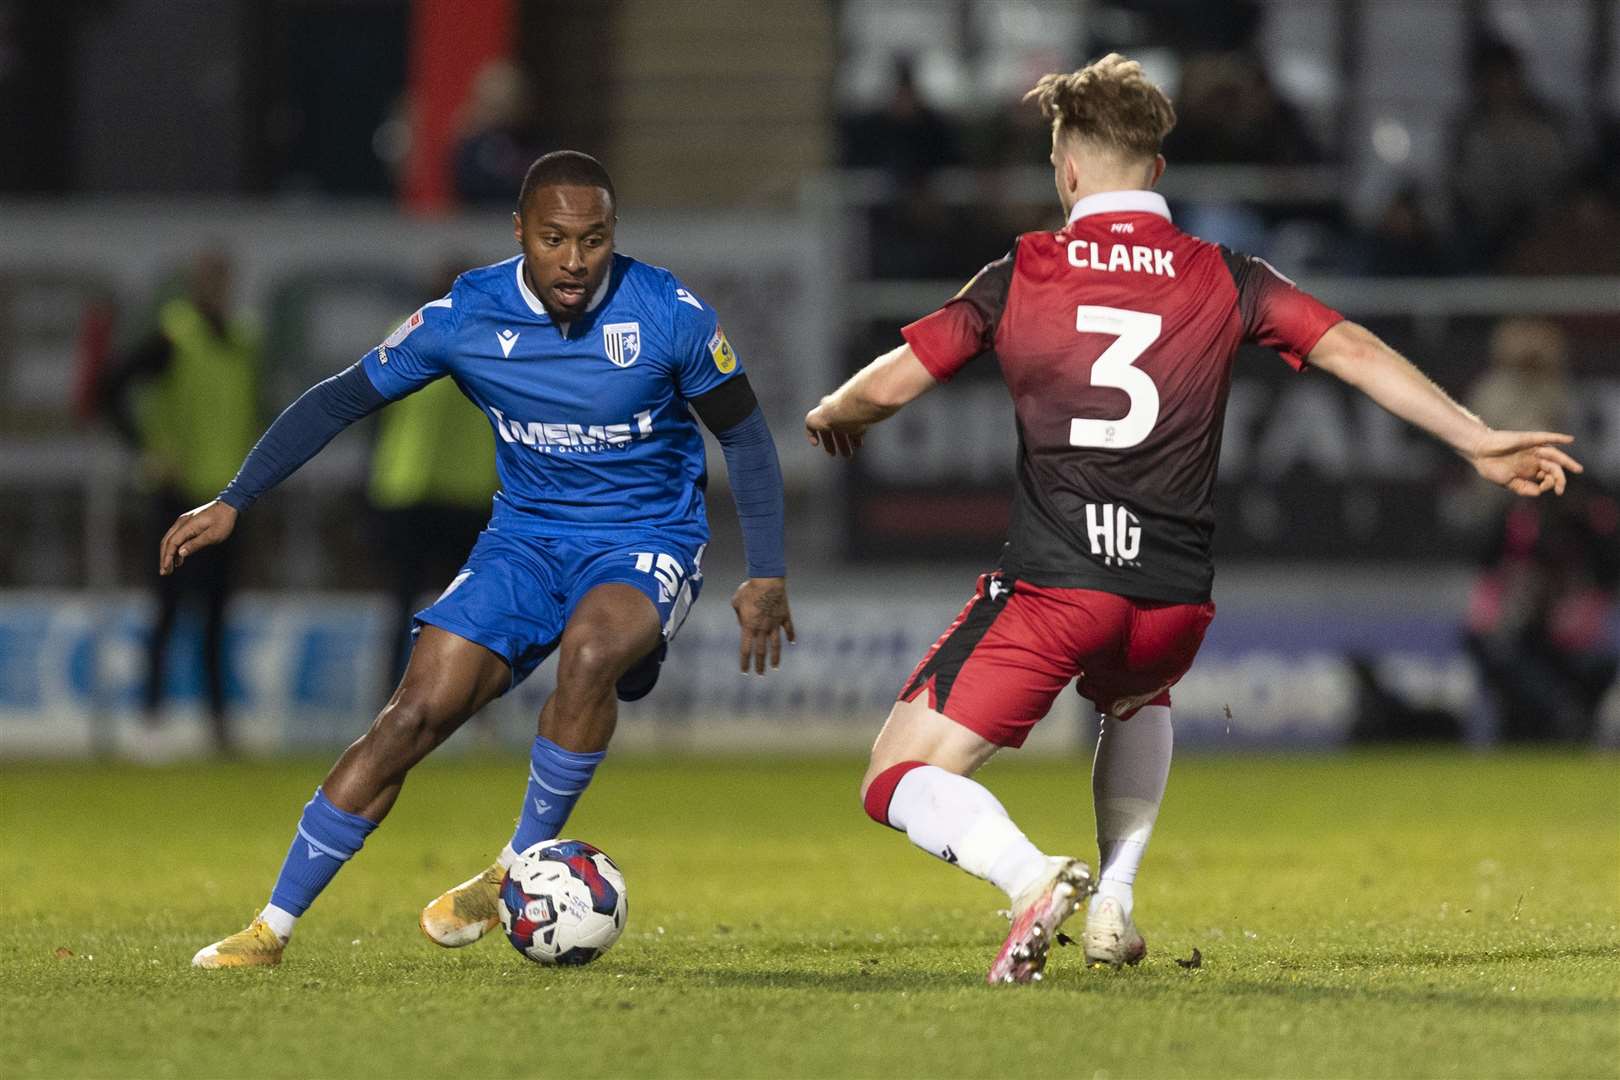 Callum Harriott takes on his man after coming off the bench for Gillingham against Stevenage